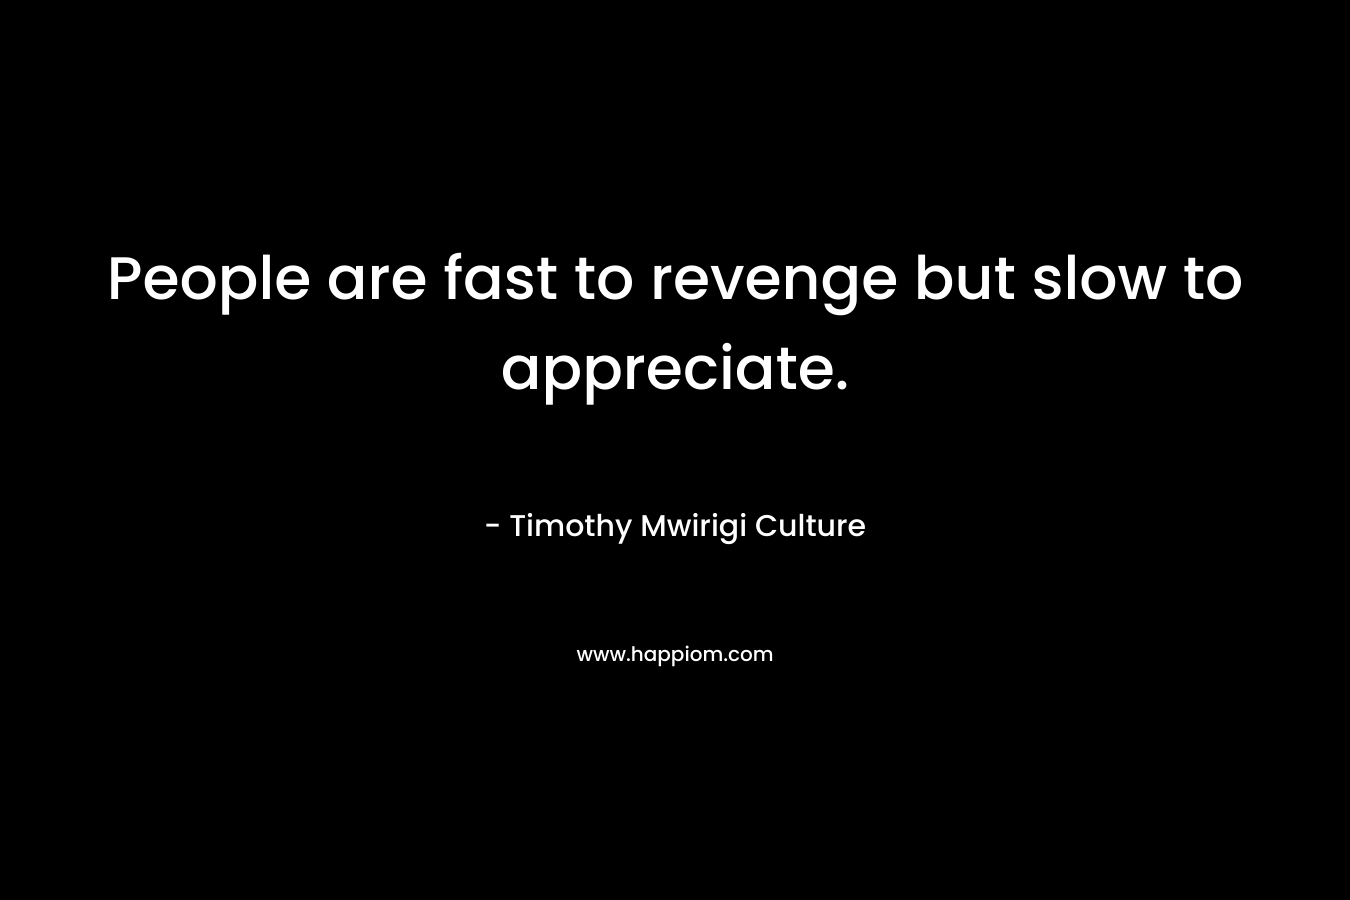 People are fast to revenge but slow to appreciate. – Timothy Mwirigi Culture